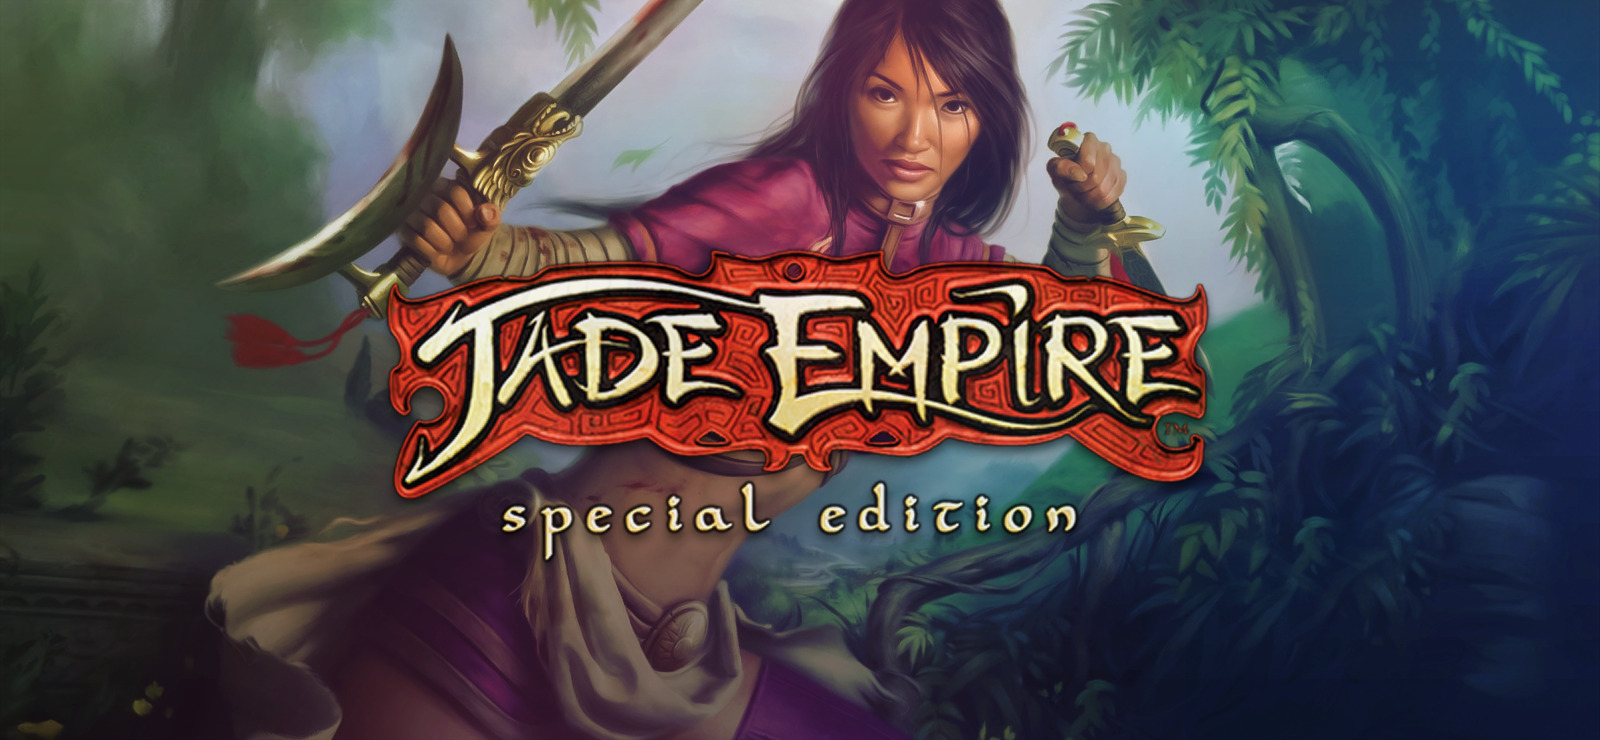 Jade Empire PC Game Download For Free